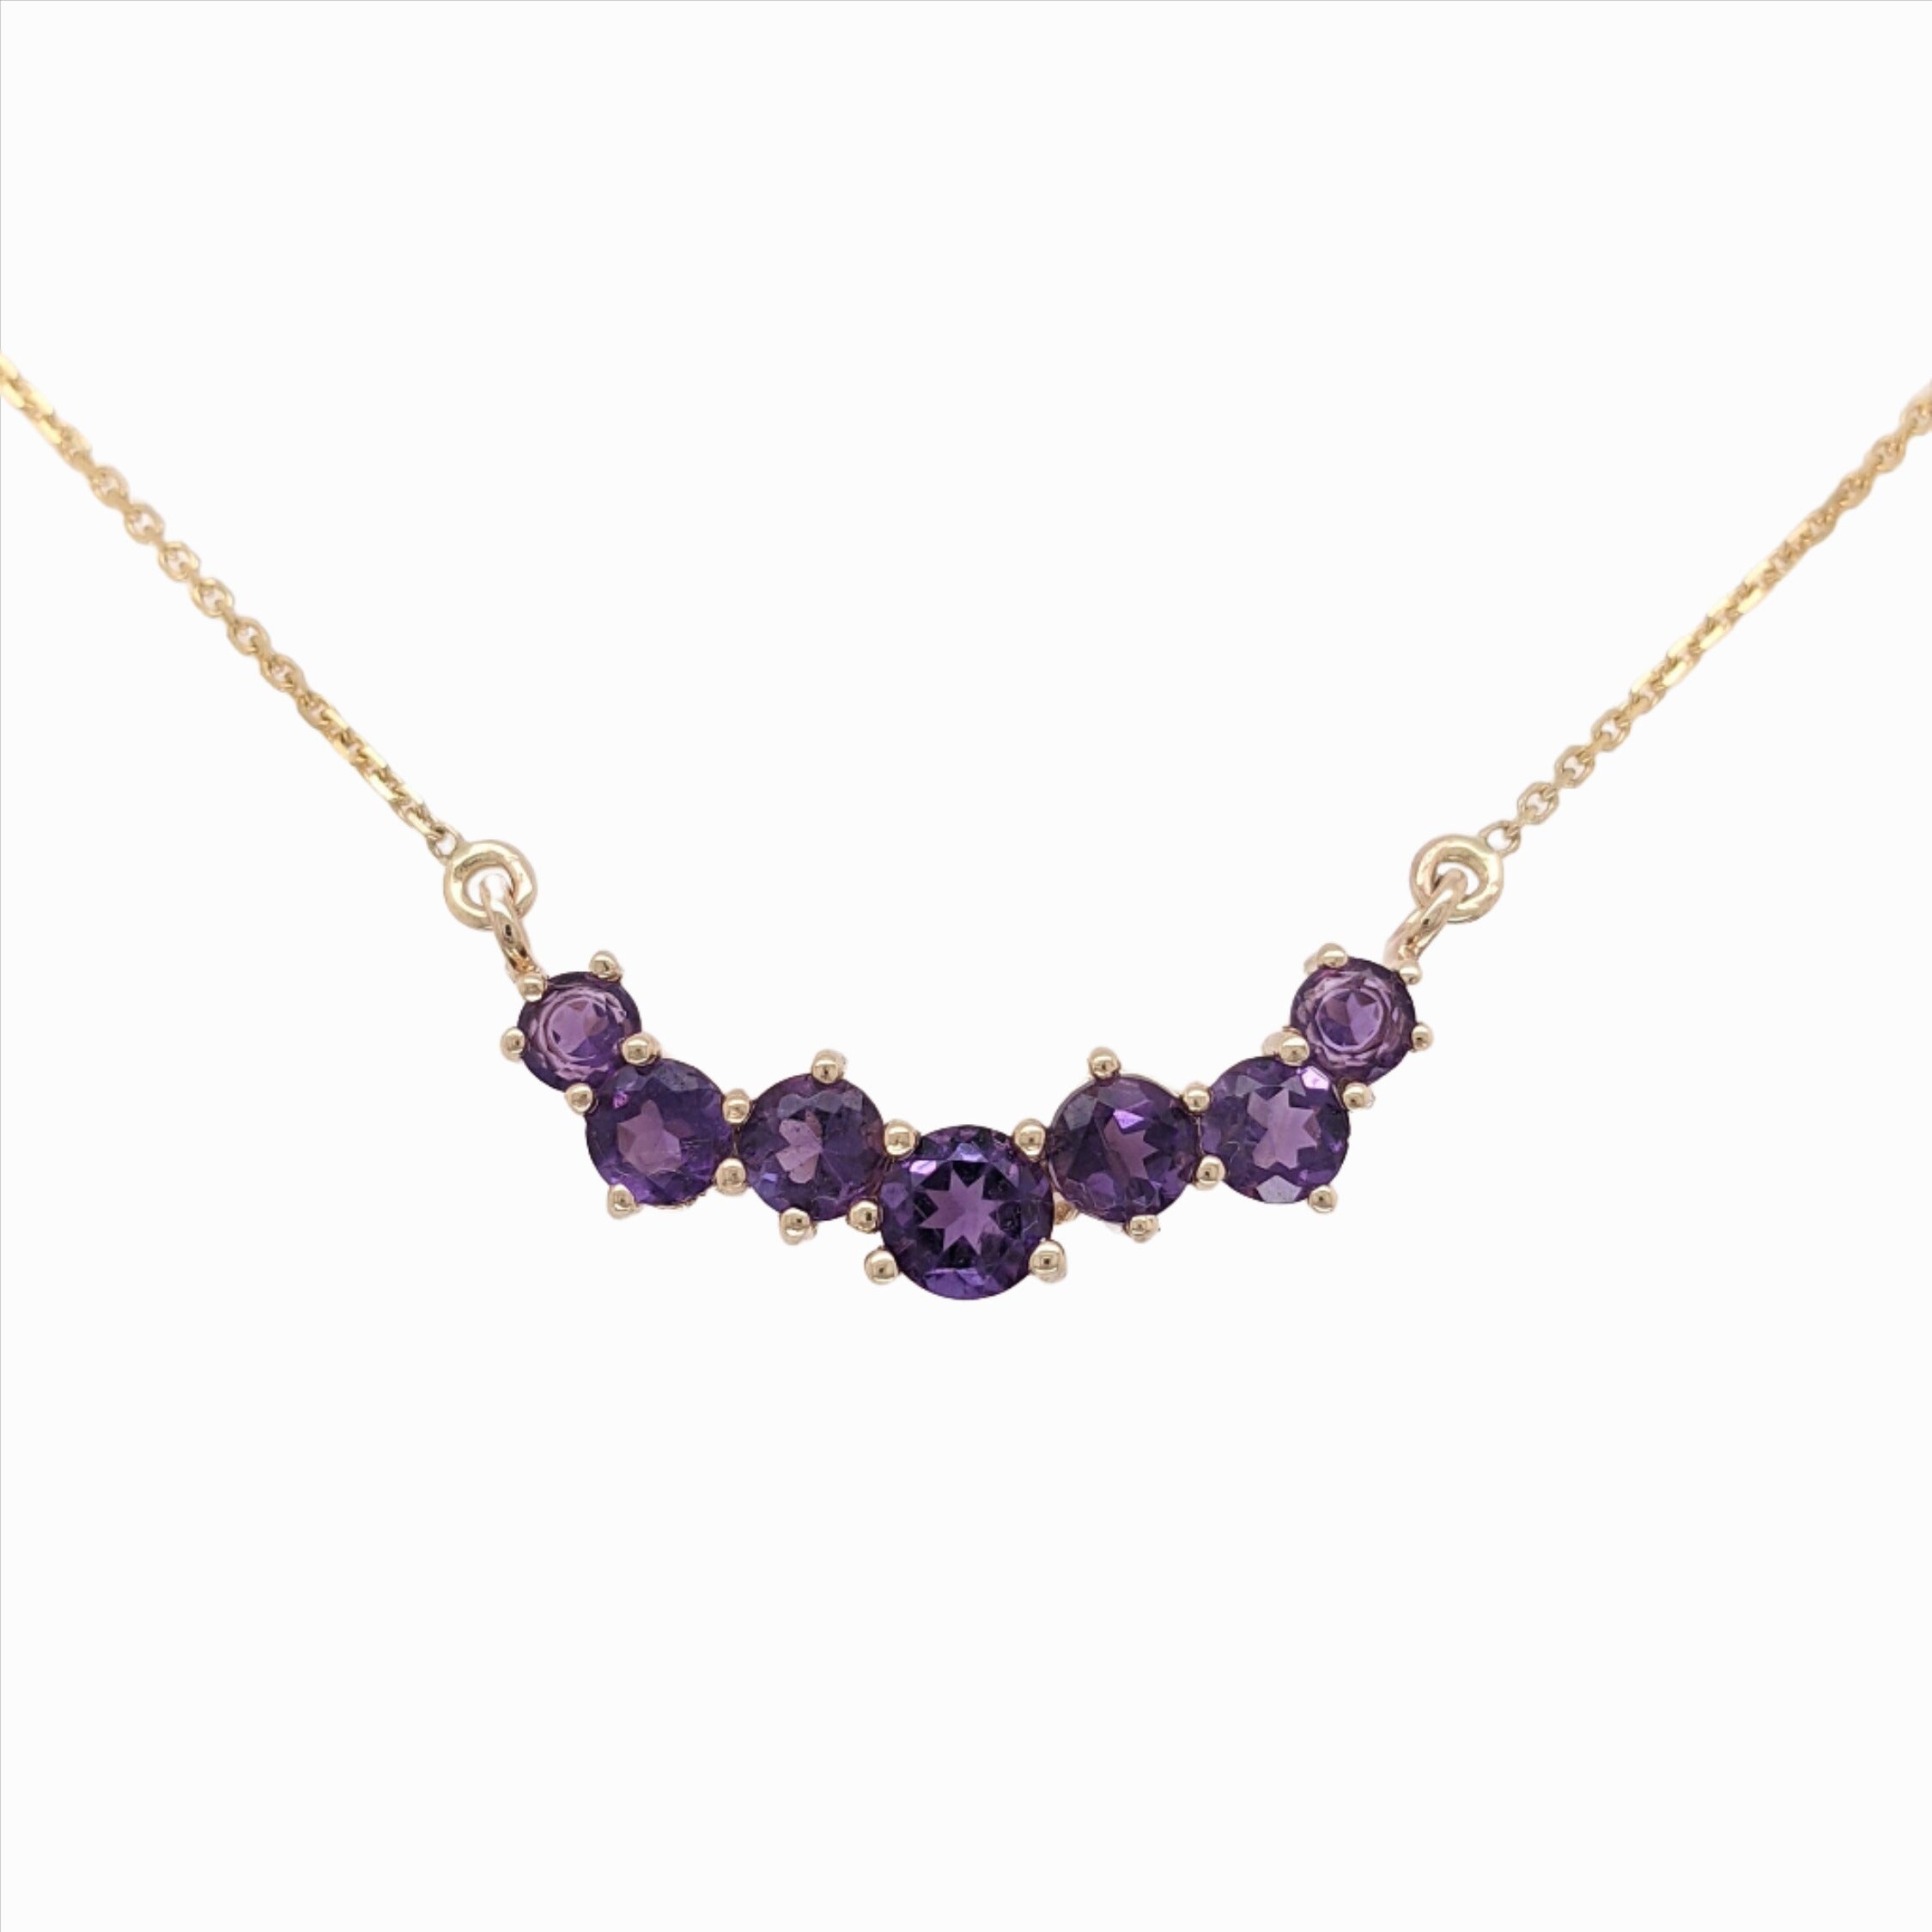 Pendants-Natural Amethyst Necklace in Solid 14K Yellow, White and Rose Gold | Gemstone Necklace | February Birthstone | Attached Chain | Natural Gem - NNJGemstones